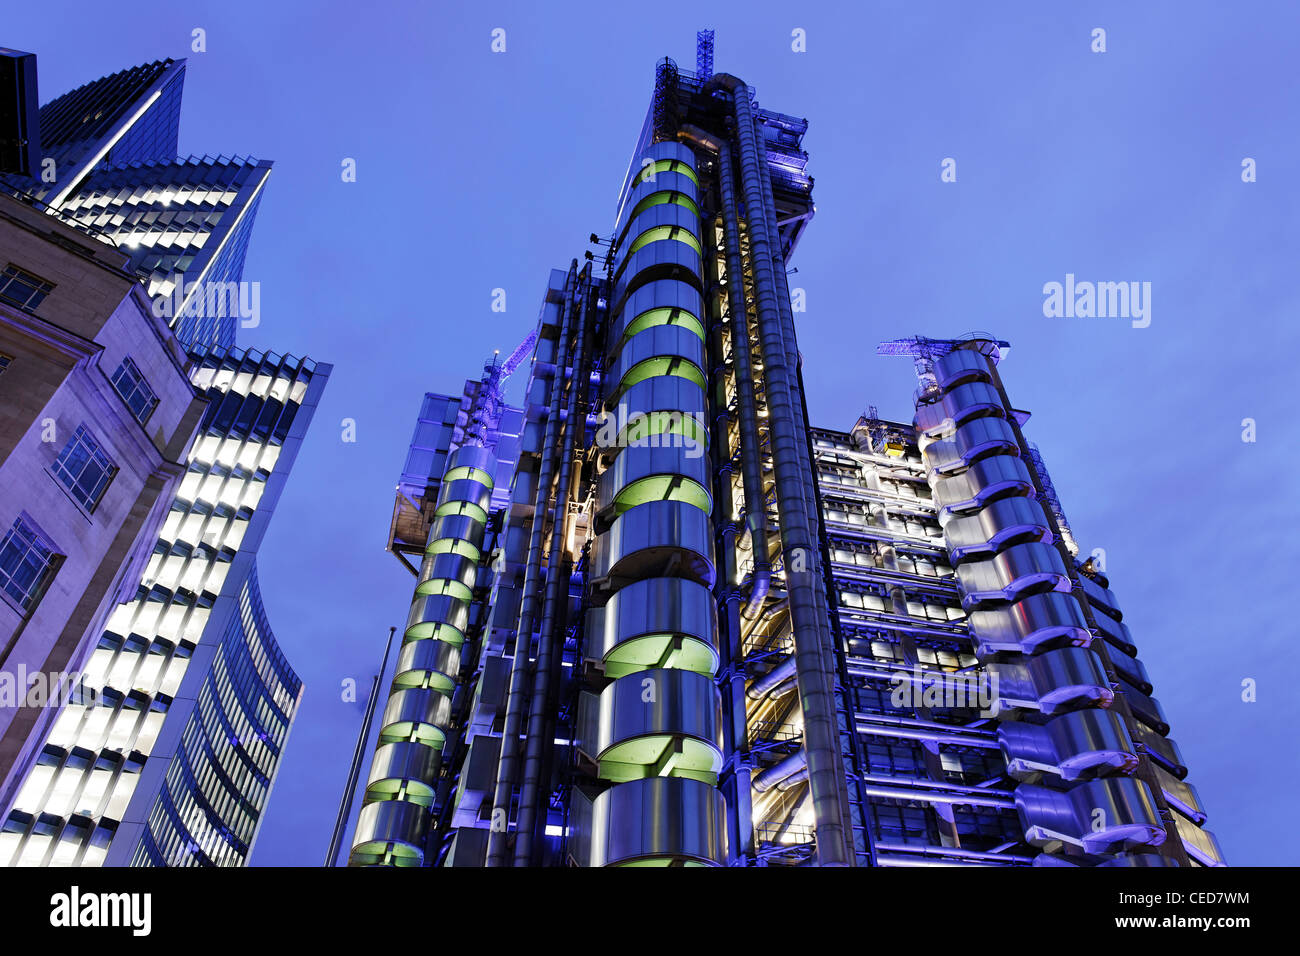 Modern architecture at dusk, Lloyd's, Lloyds Building, Tower by architect Richard Rogers, City of London, London, England Stock Photo